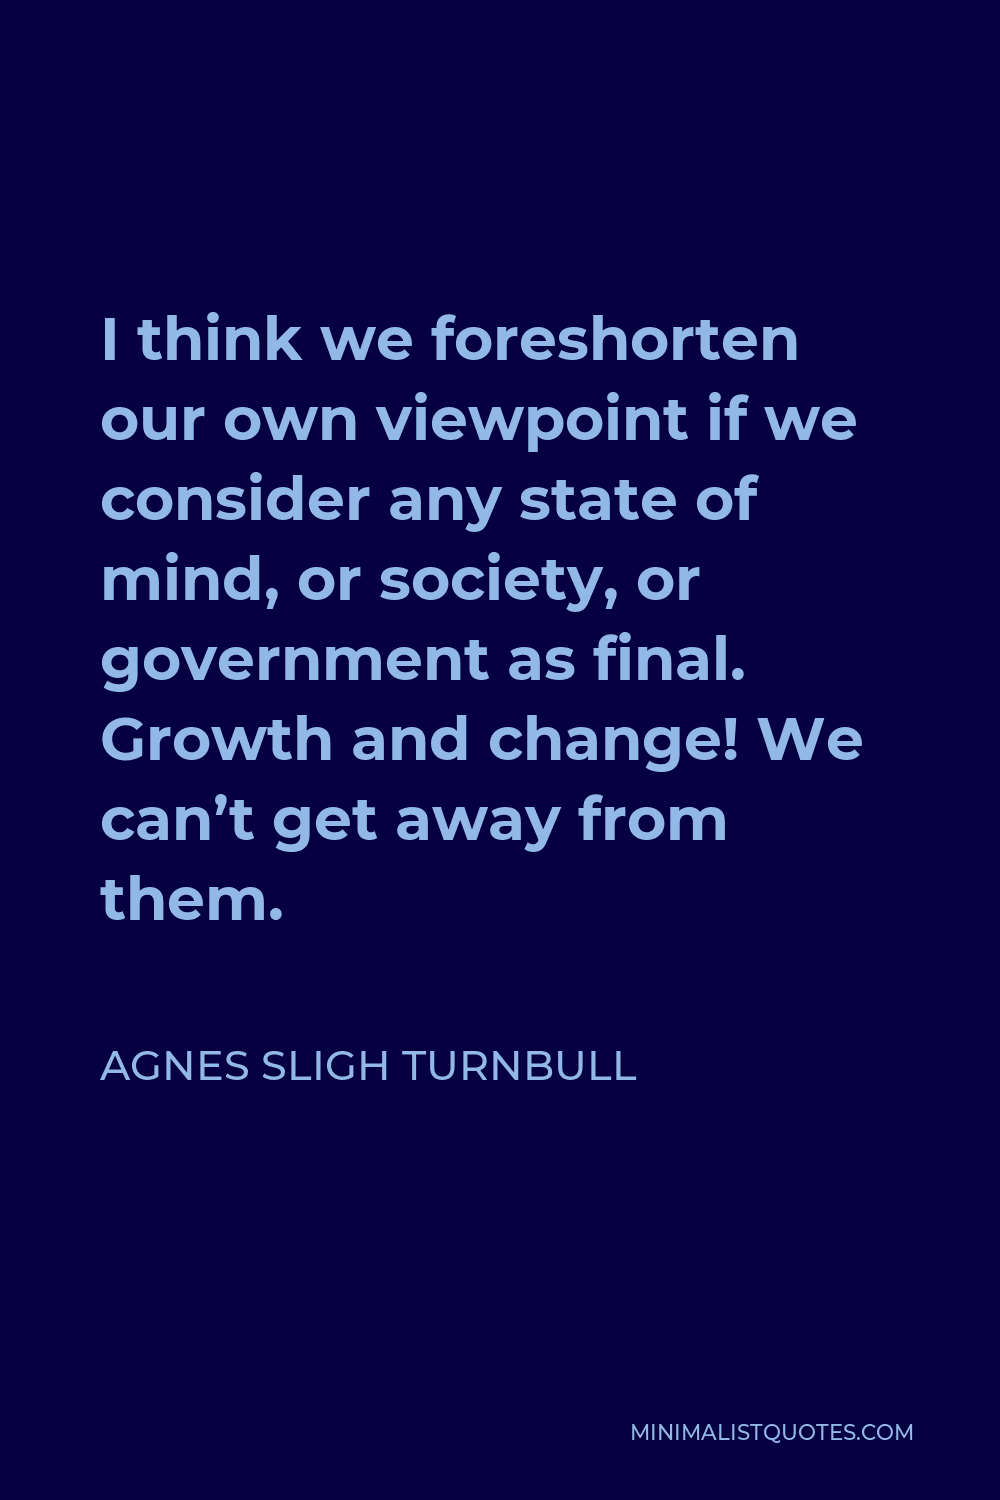 Agnes Sligh Turnbull Quote - I think we foreshorten our own viewpoint if we consider any state of mind, or society, or government as final. Growth and change! We can’t get away from them.